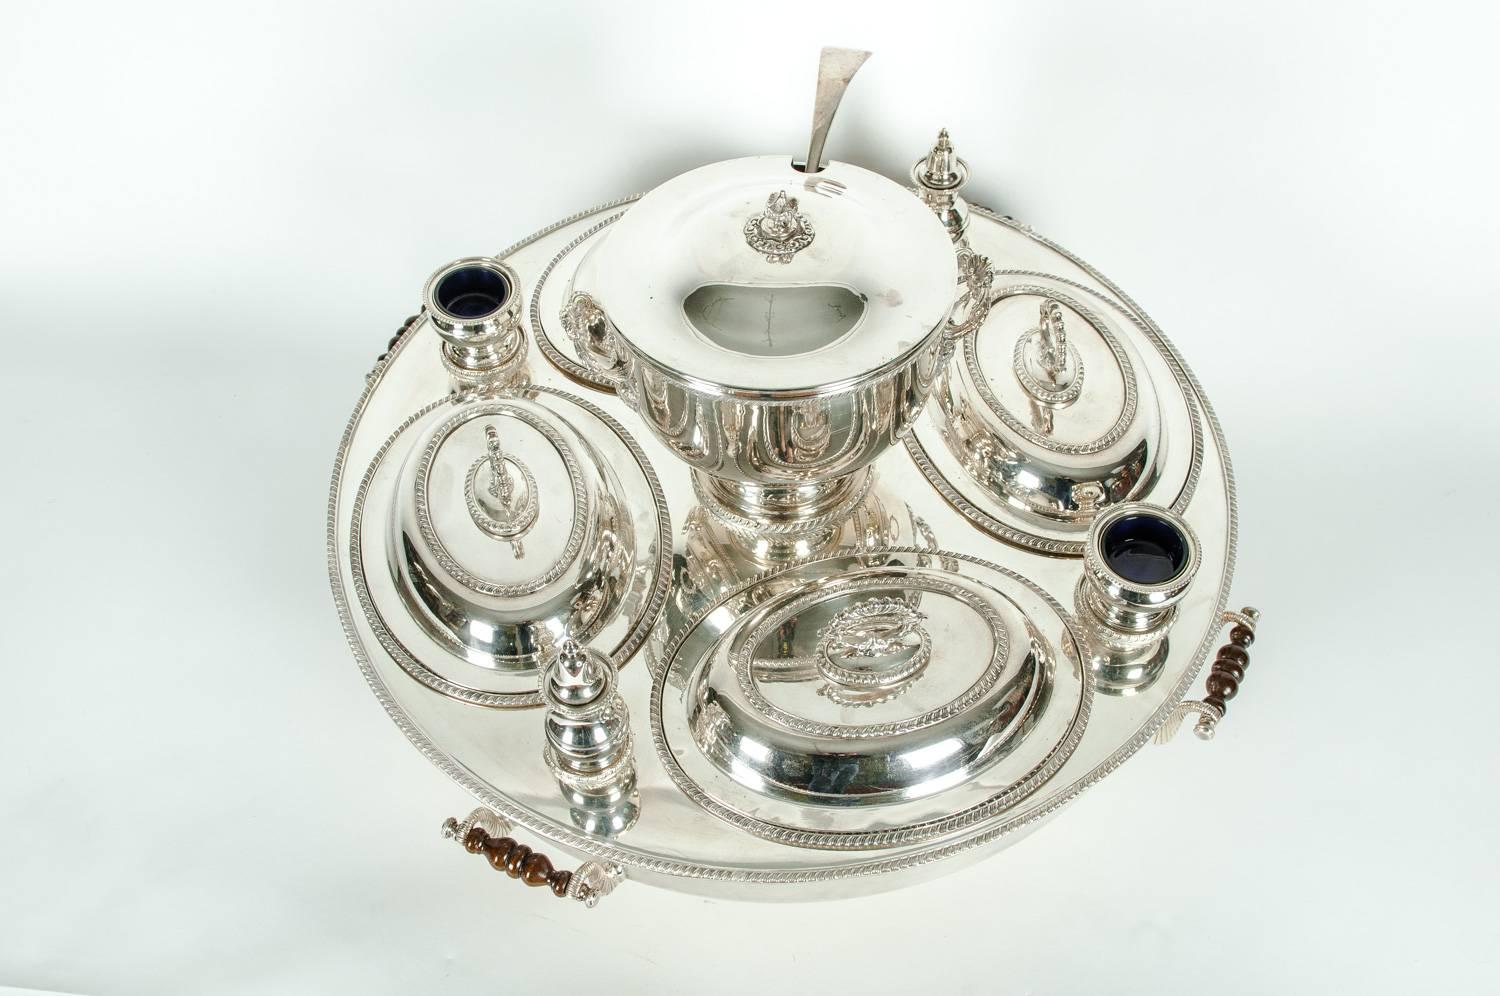 Very large English silver plated / copper revolving center table super dish. This piece is just exquisite, each piece is detachable for storage and shipping purposes. Makers mark on each piece, it measures 24 inches diameter x 17 inches high.